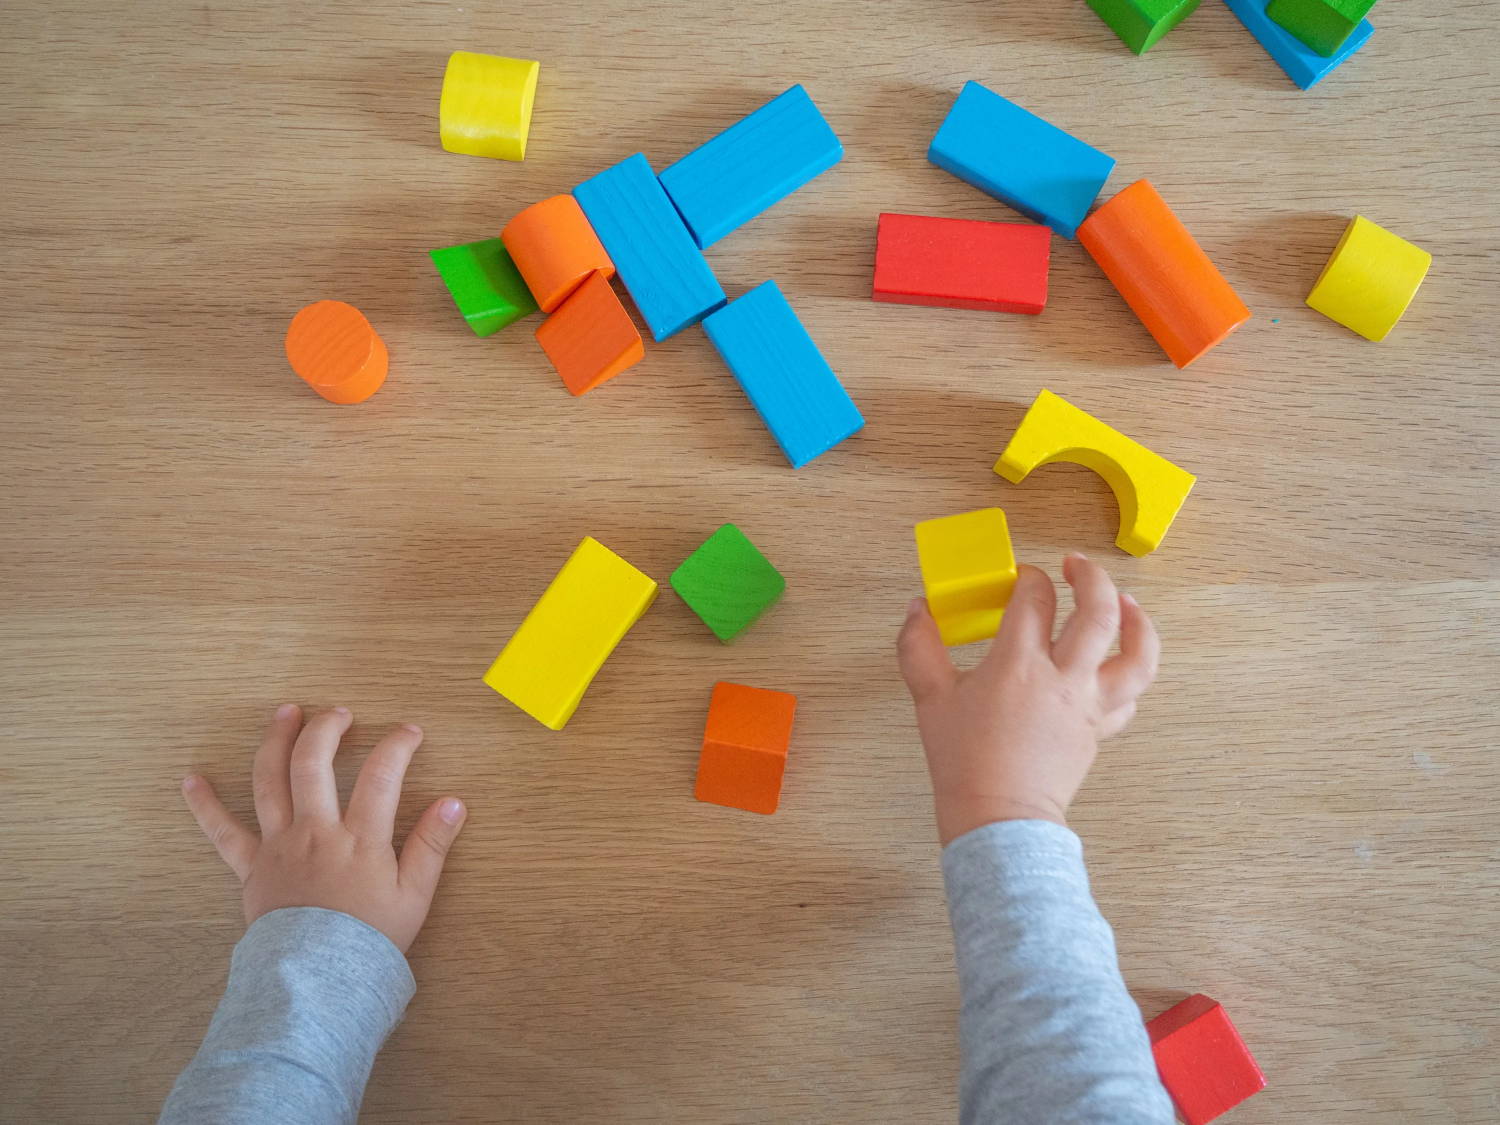 Child's hands playing with multi-colored wooden blocks